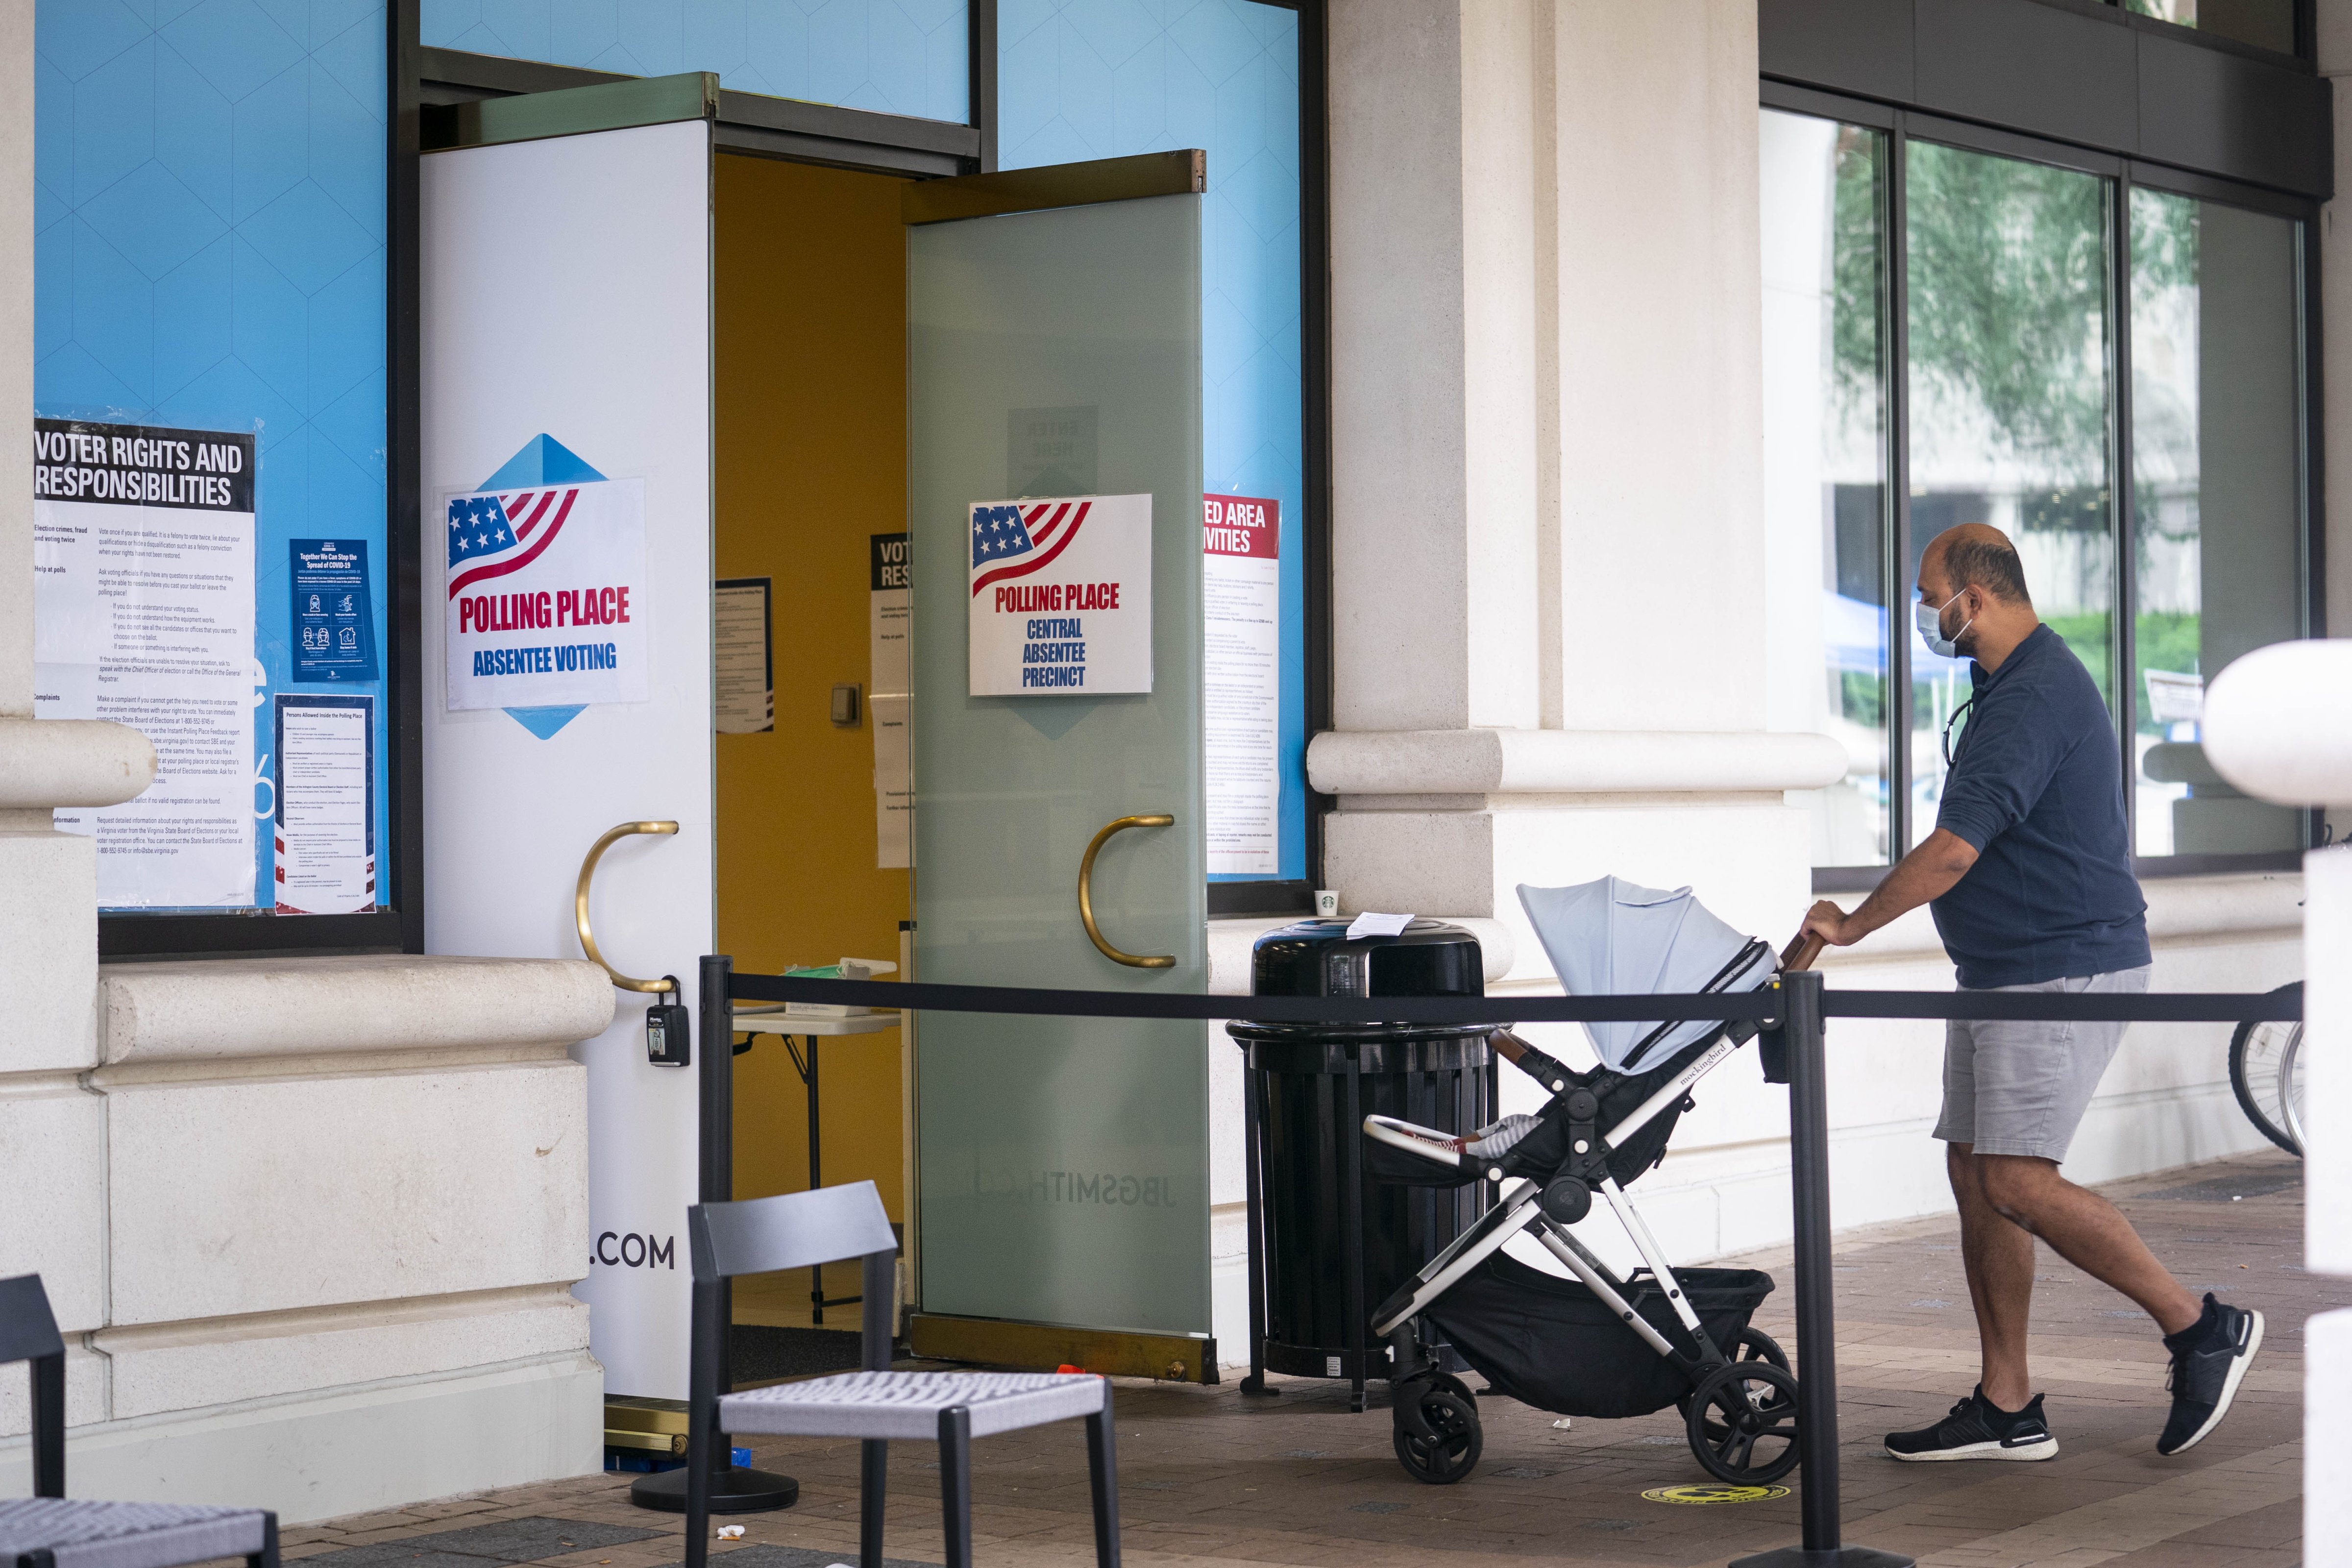 A voter wears a protective mask while entering an early voting polling location for the 2020 Presidential elections in Arlington, Virginia. on Sept. 18. (Sarah Silbiger—Bloomberg/Getty Images)